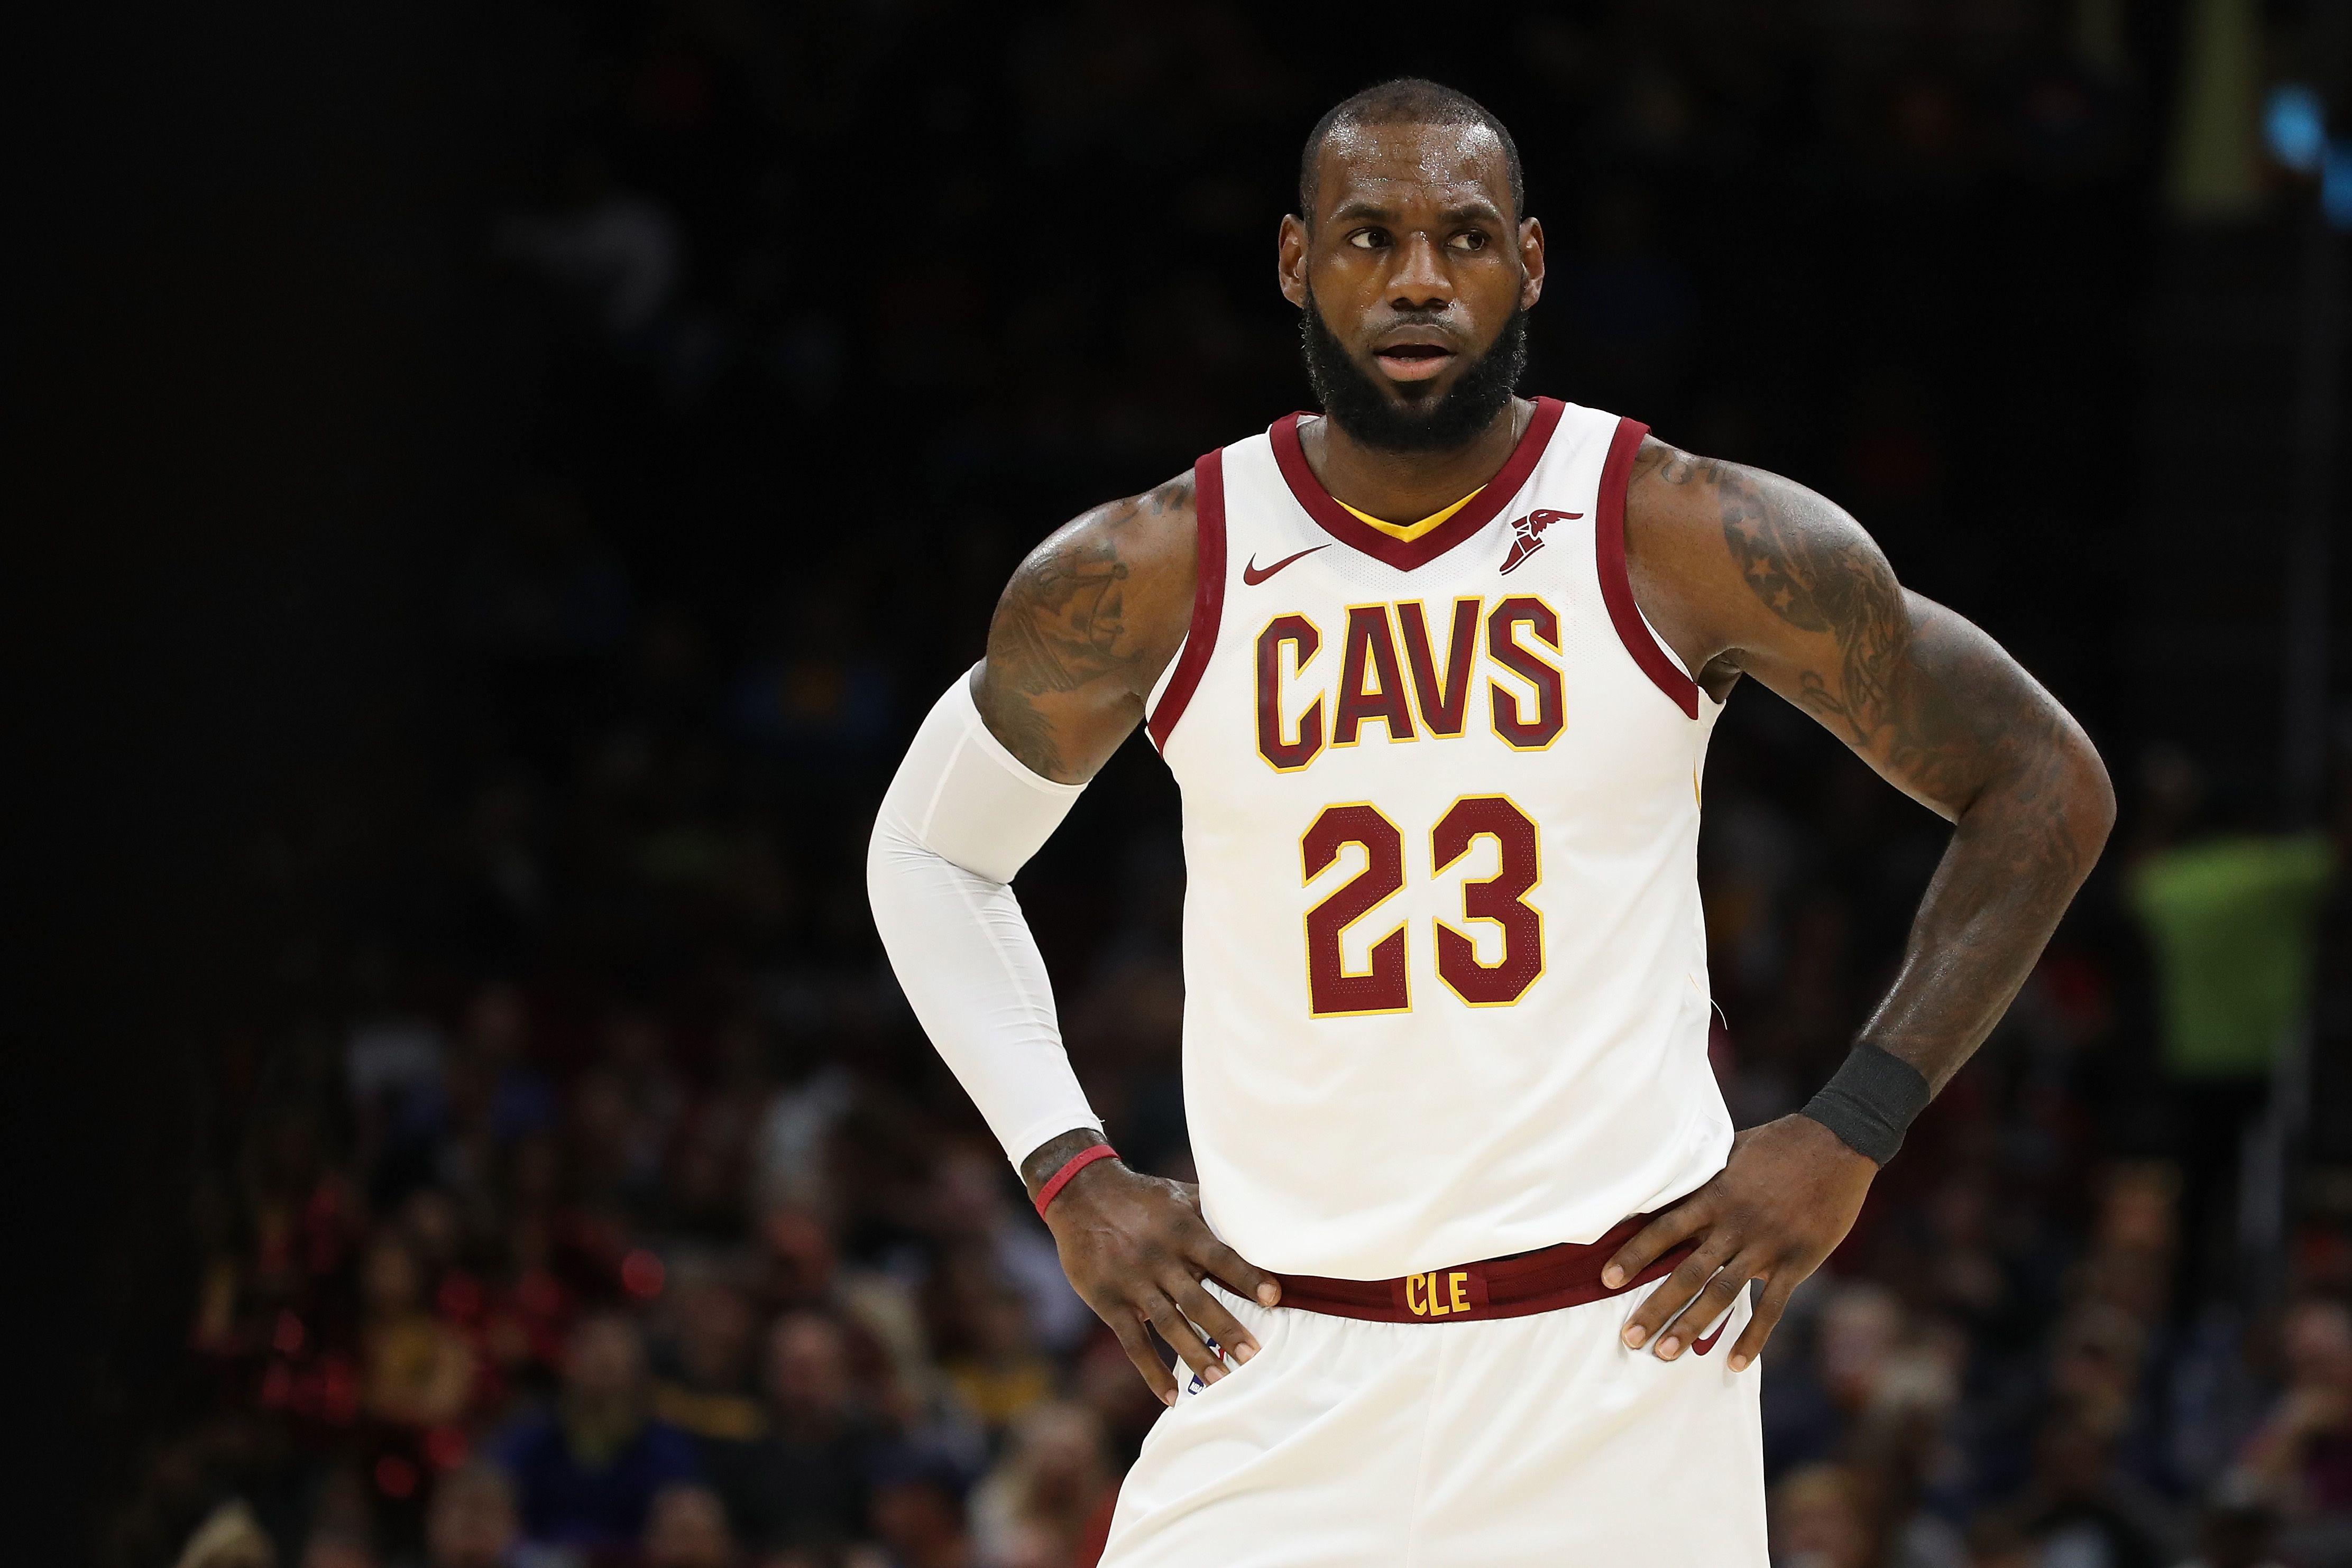 wkyc.com. WATCH. Nike releases new LeBron James commercial ahead